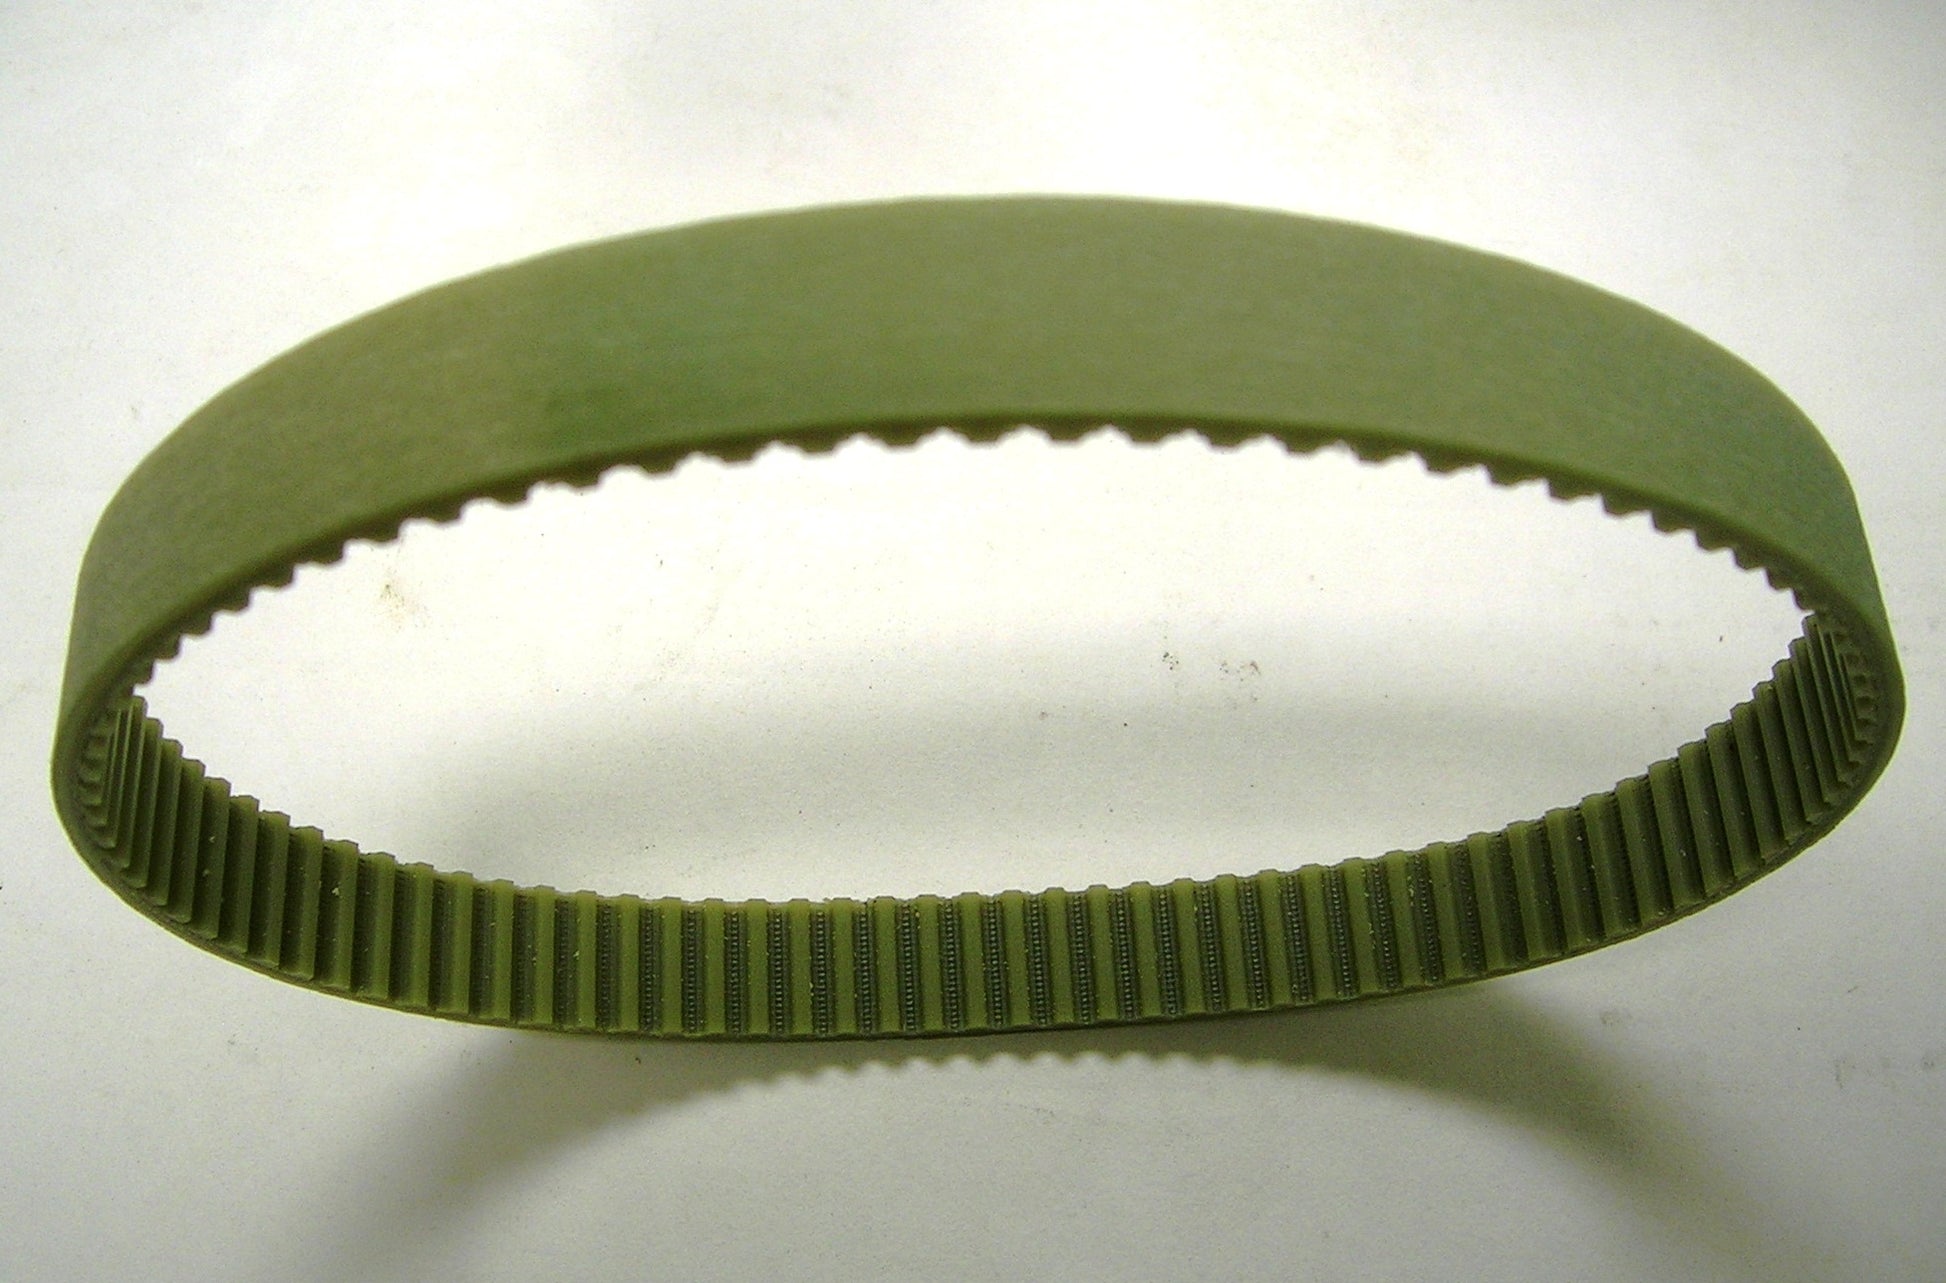 Toothed Replacement Grabber Feed Belt Schleuniger CrimpCenter 36 Hard pu